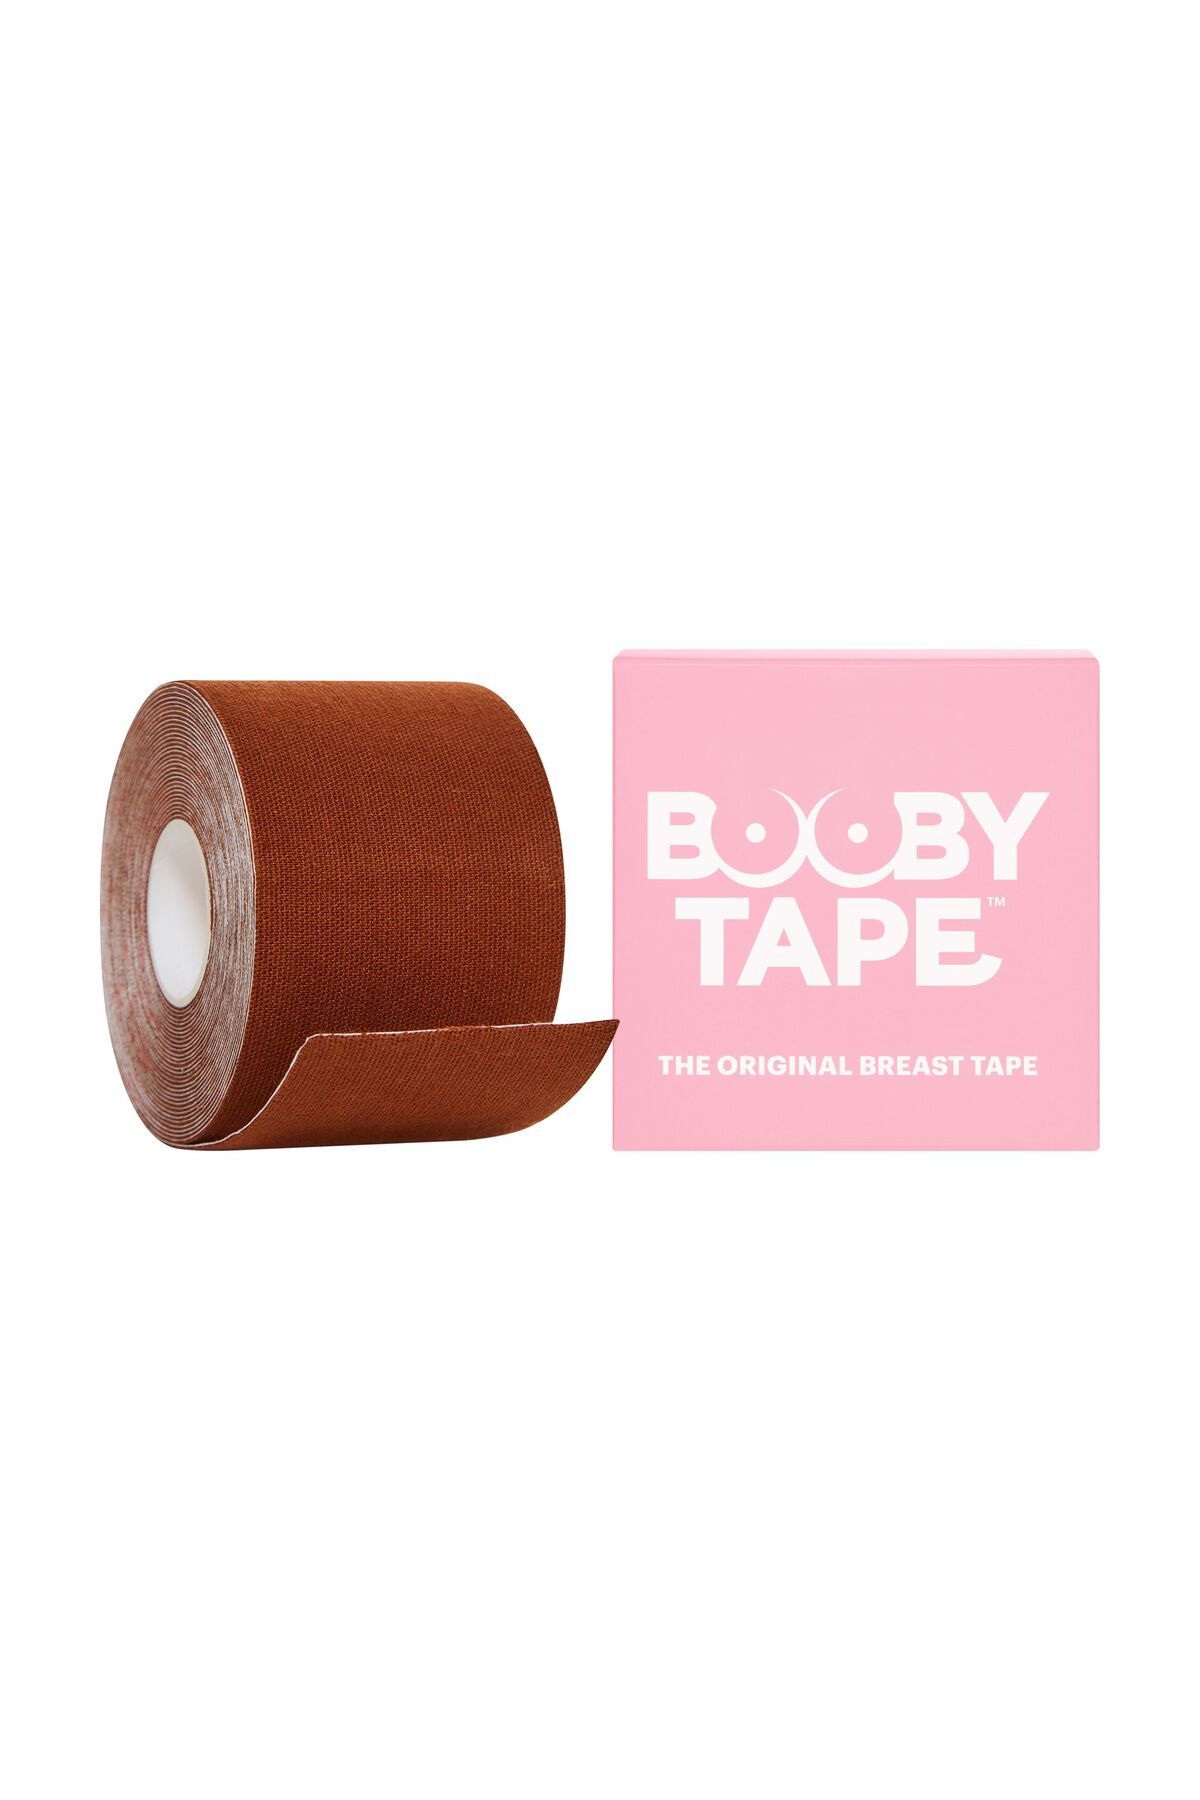 Boob Tape 3 Breast Tape for Large Breast Lift & Support, Straight